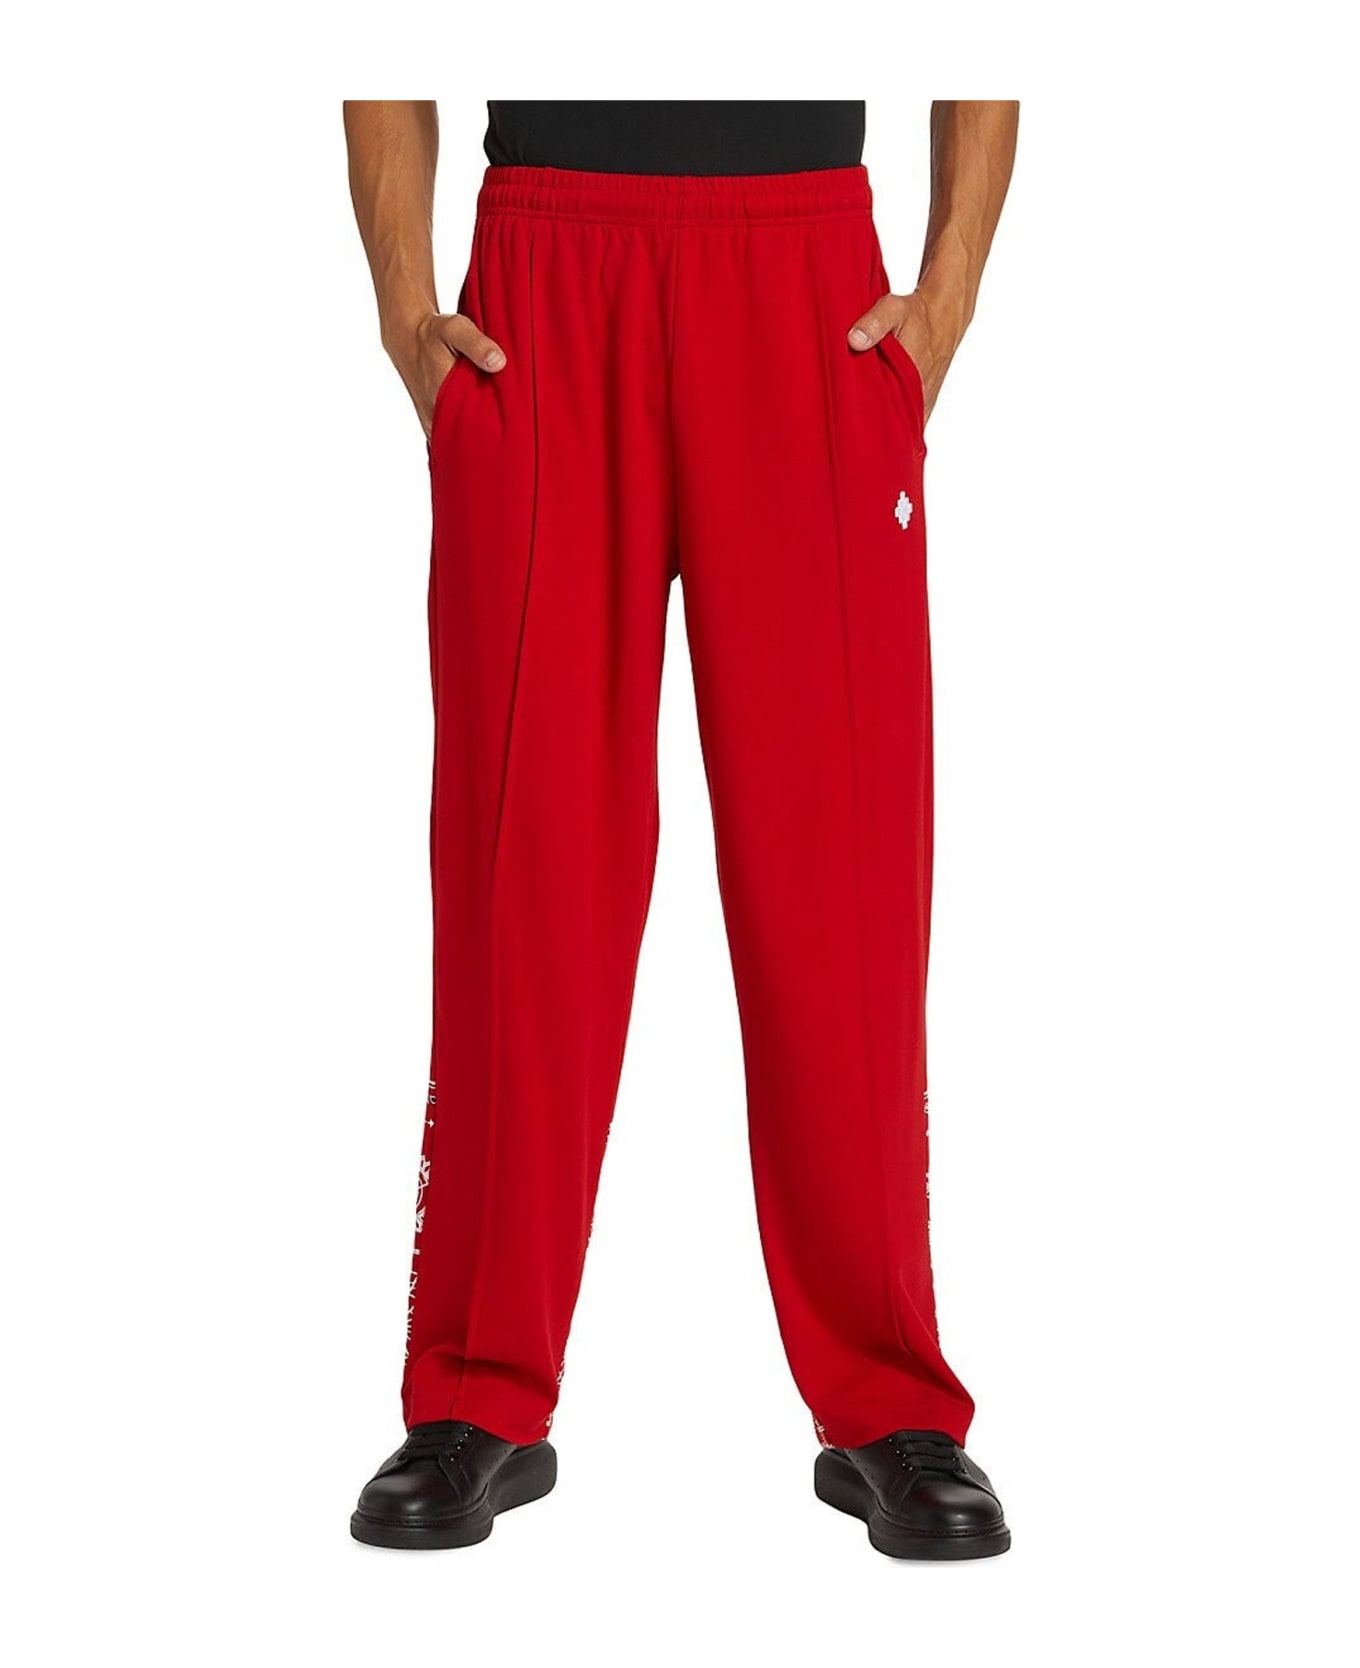 Marcelo Burlon County Of Milan Track Pants - Red